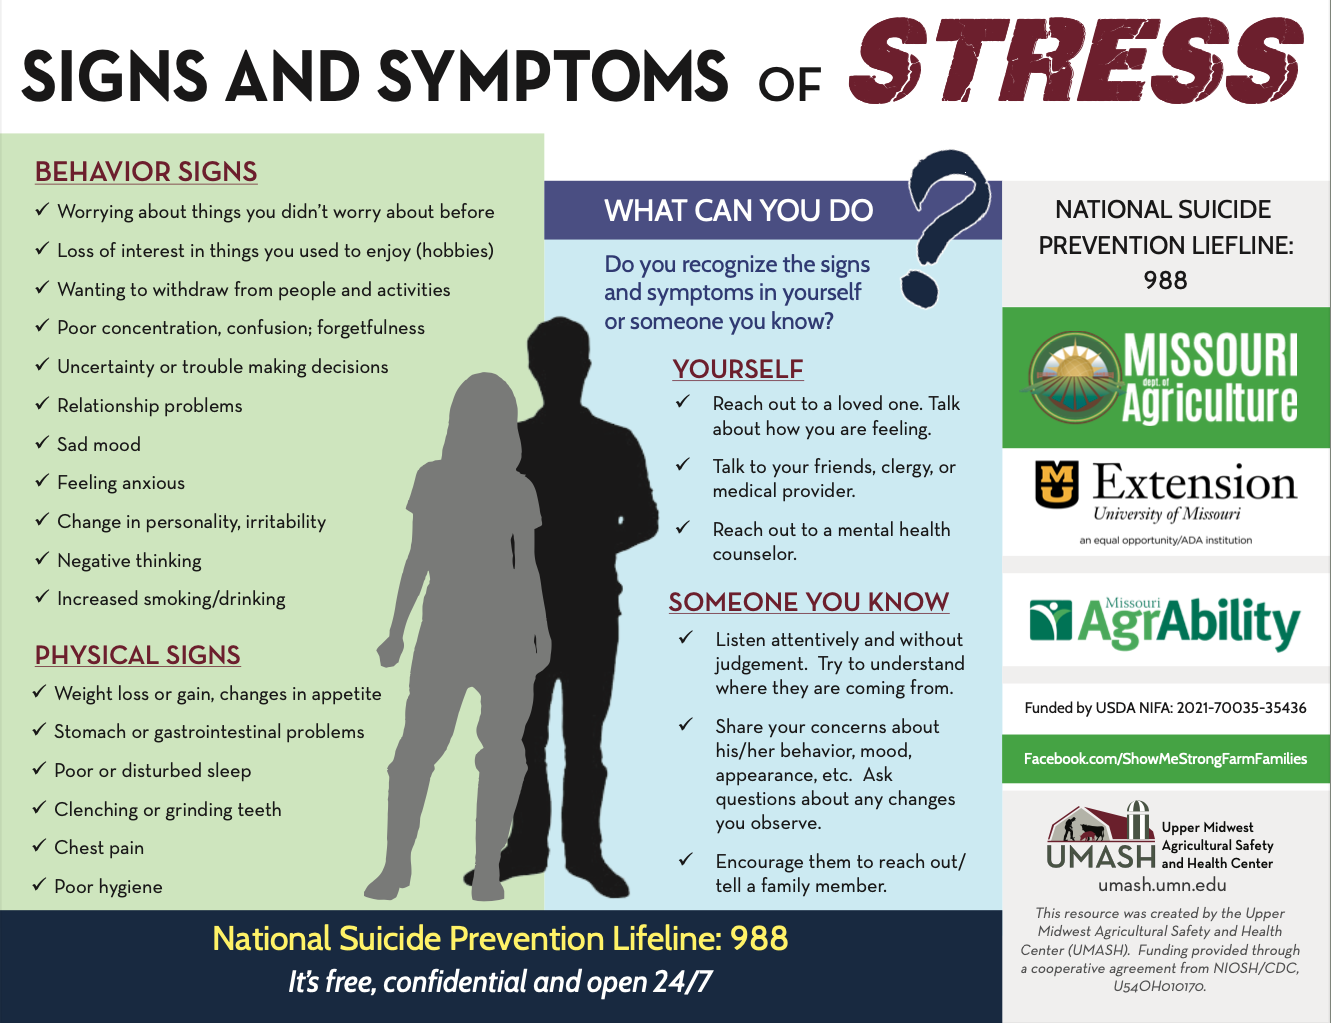 Signs and symptoms of stress.